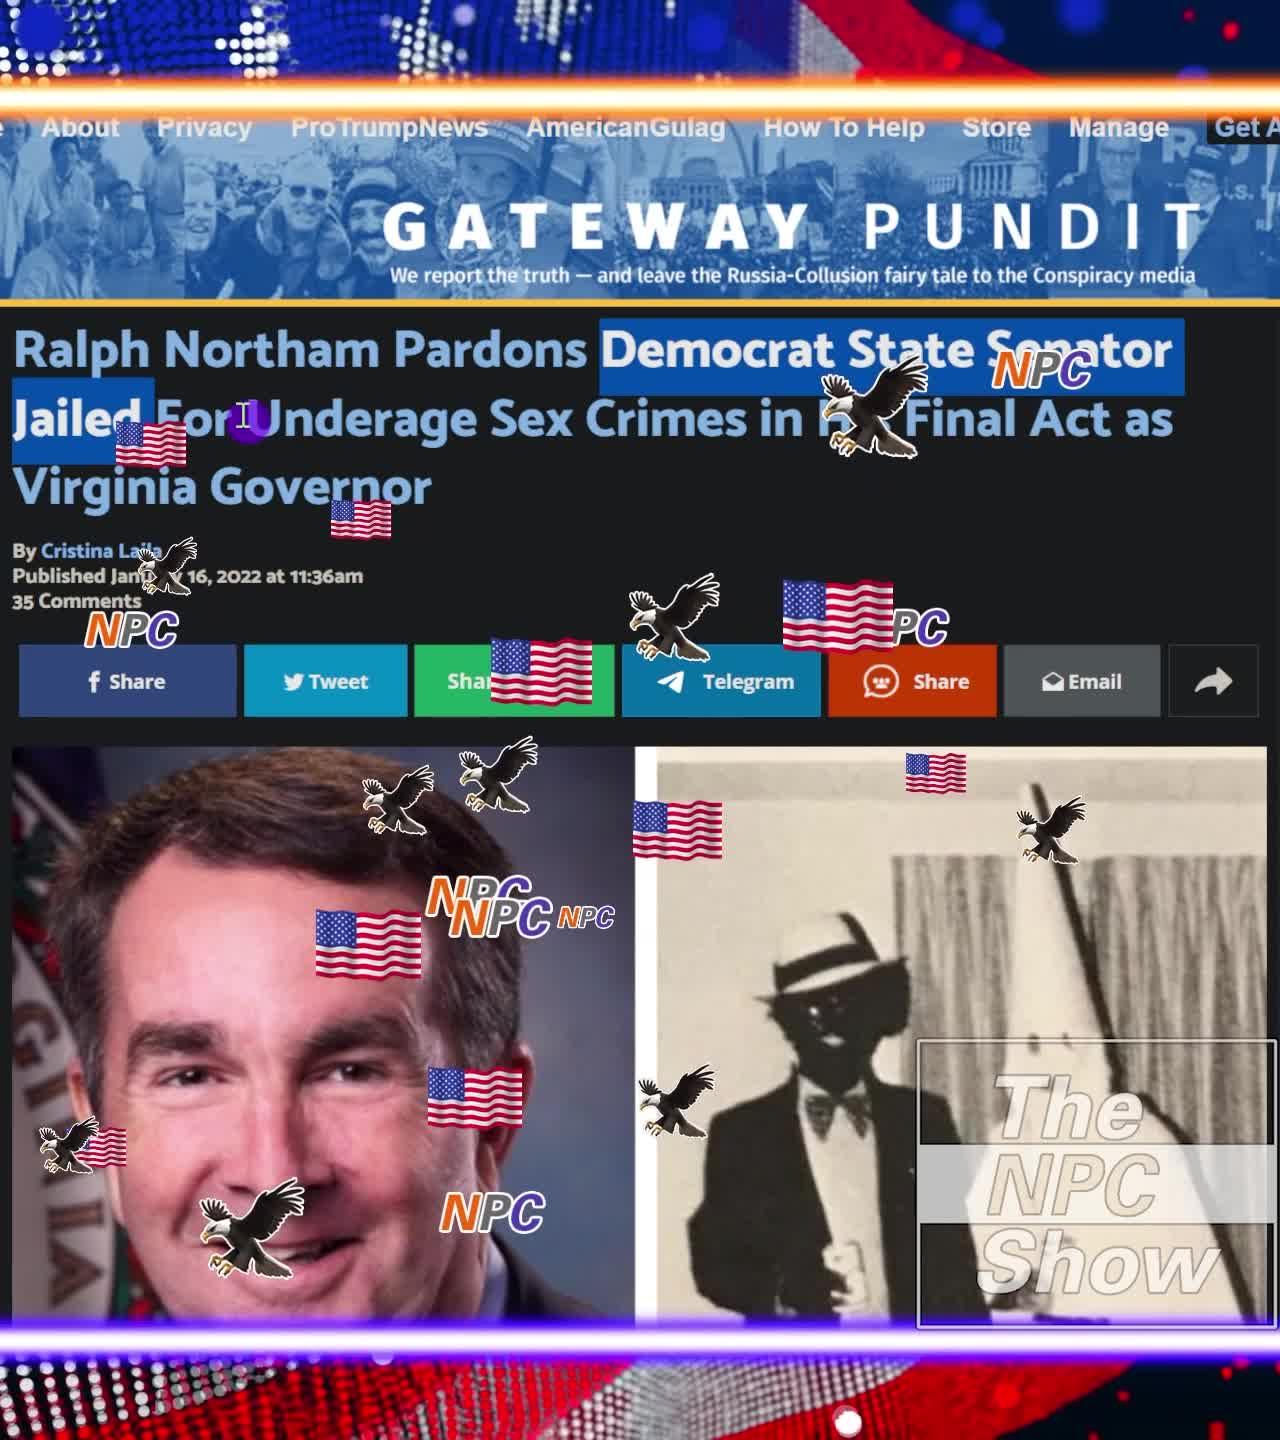 Ralph Northam Pardons A Ped0 On His Way Out